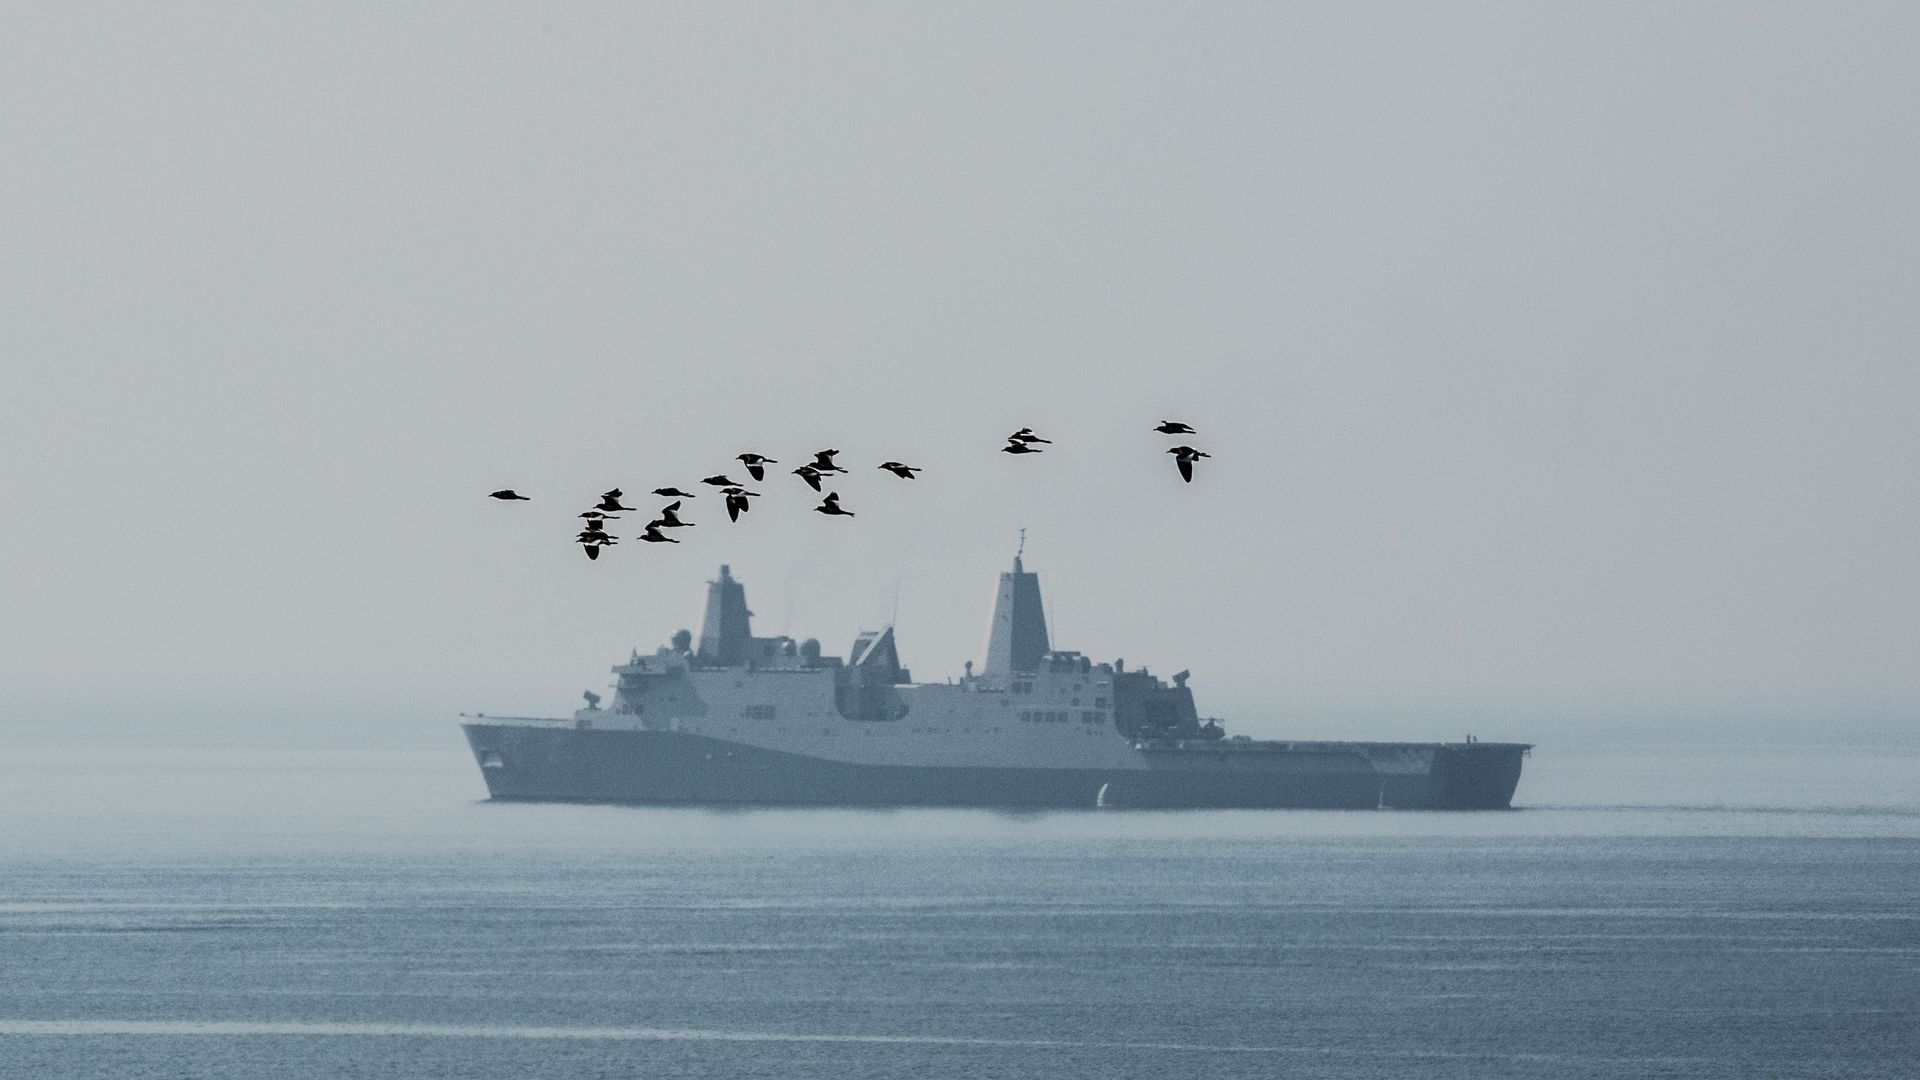 A flock of birds flies in the vicinity of the USS Green Bay, an amphibious transport dock as it manoeuvrers off the Thai coast during an amphibian landing exercise in Chonburi on February 17, 2017